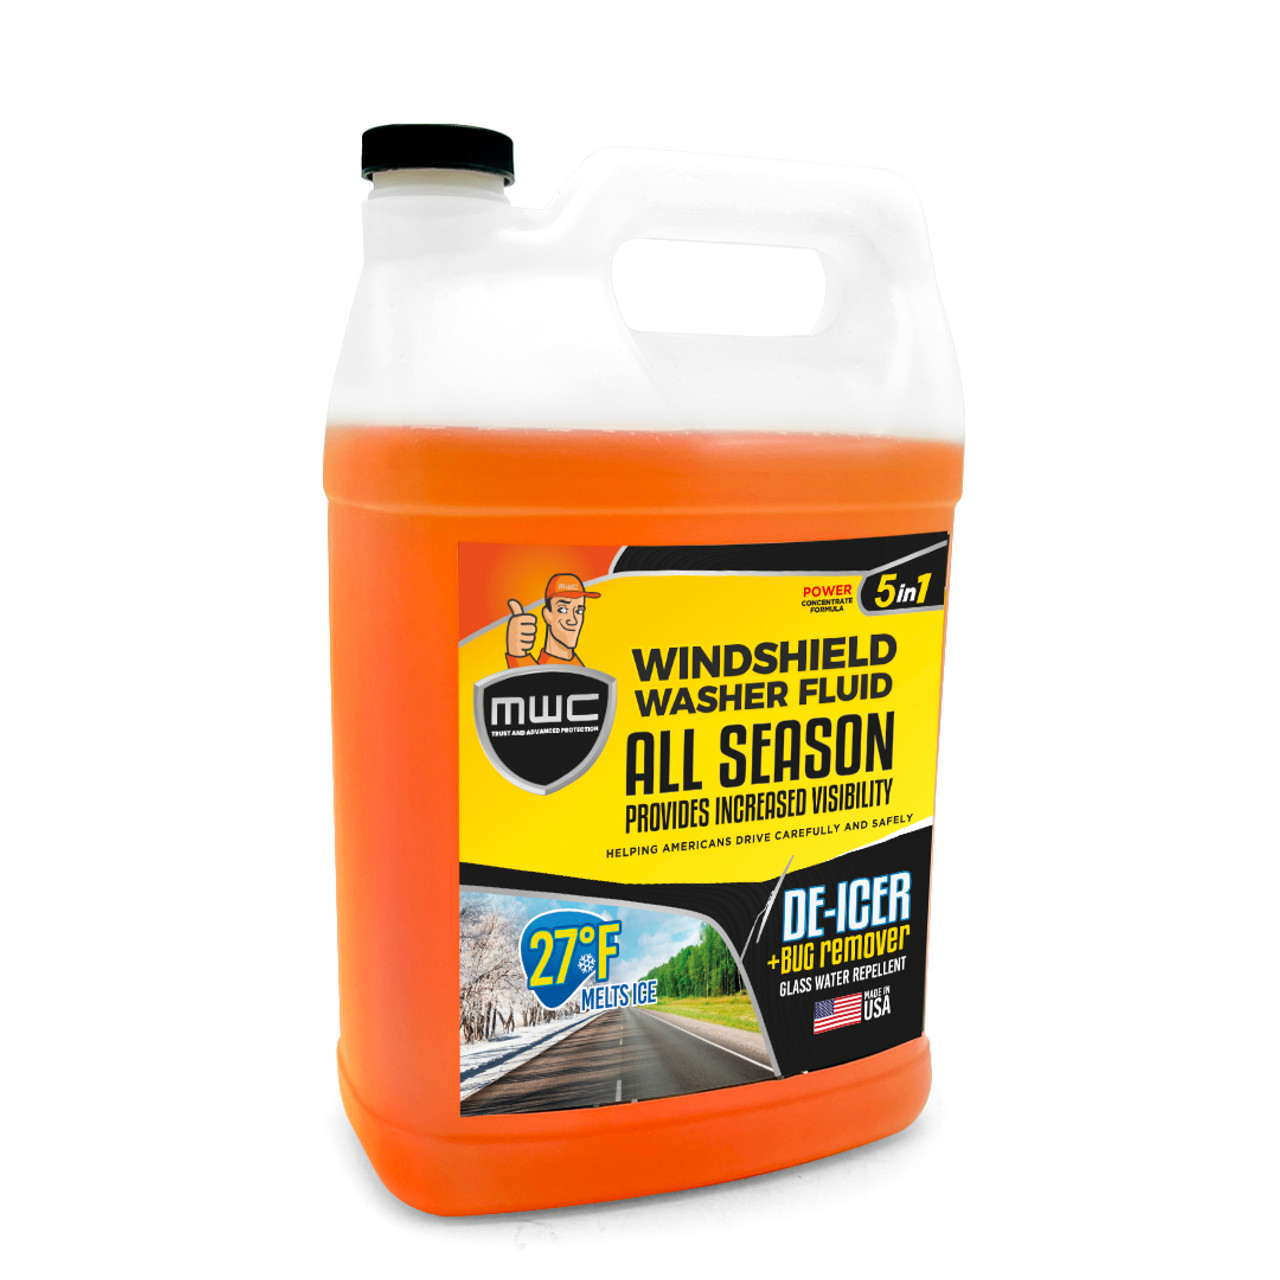 MWC 446931 Windshield Washer Fluid Clean + Remover Green 1 Gal (3.78 Liters)